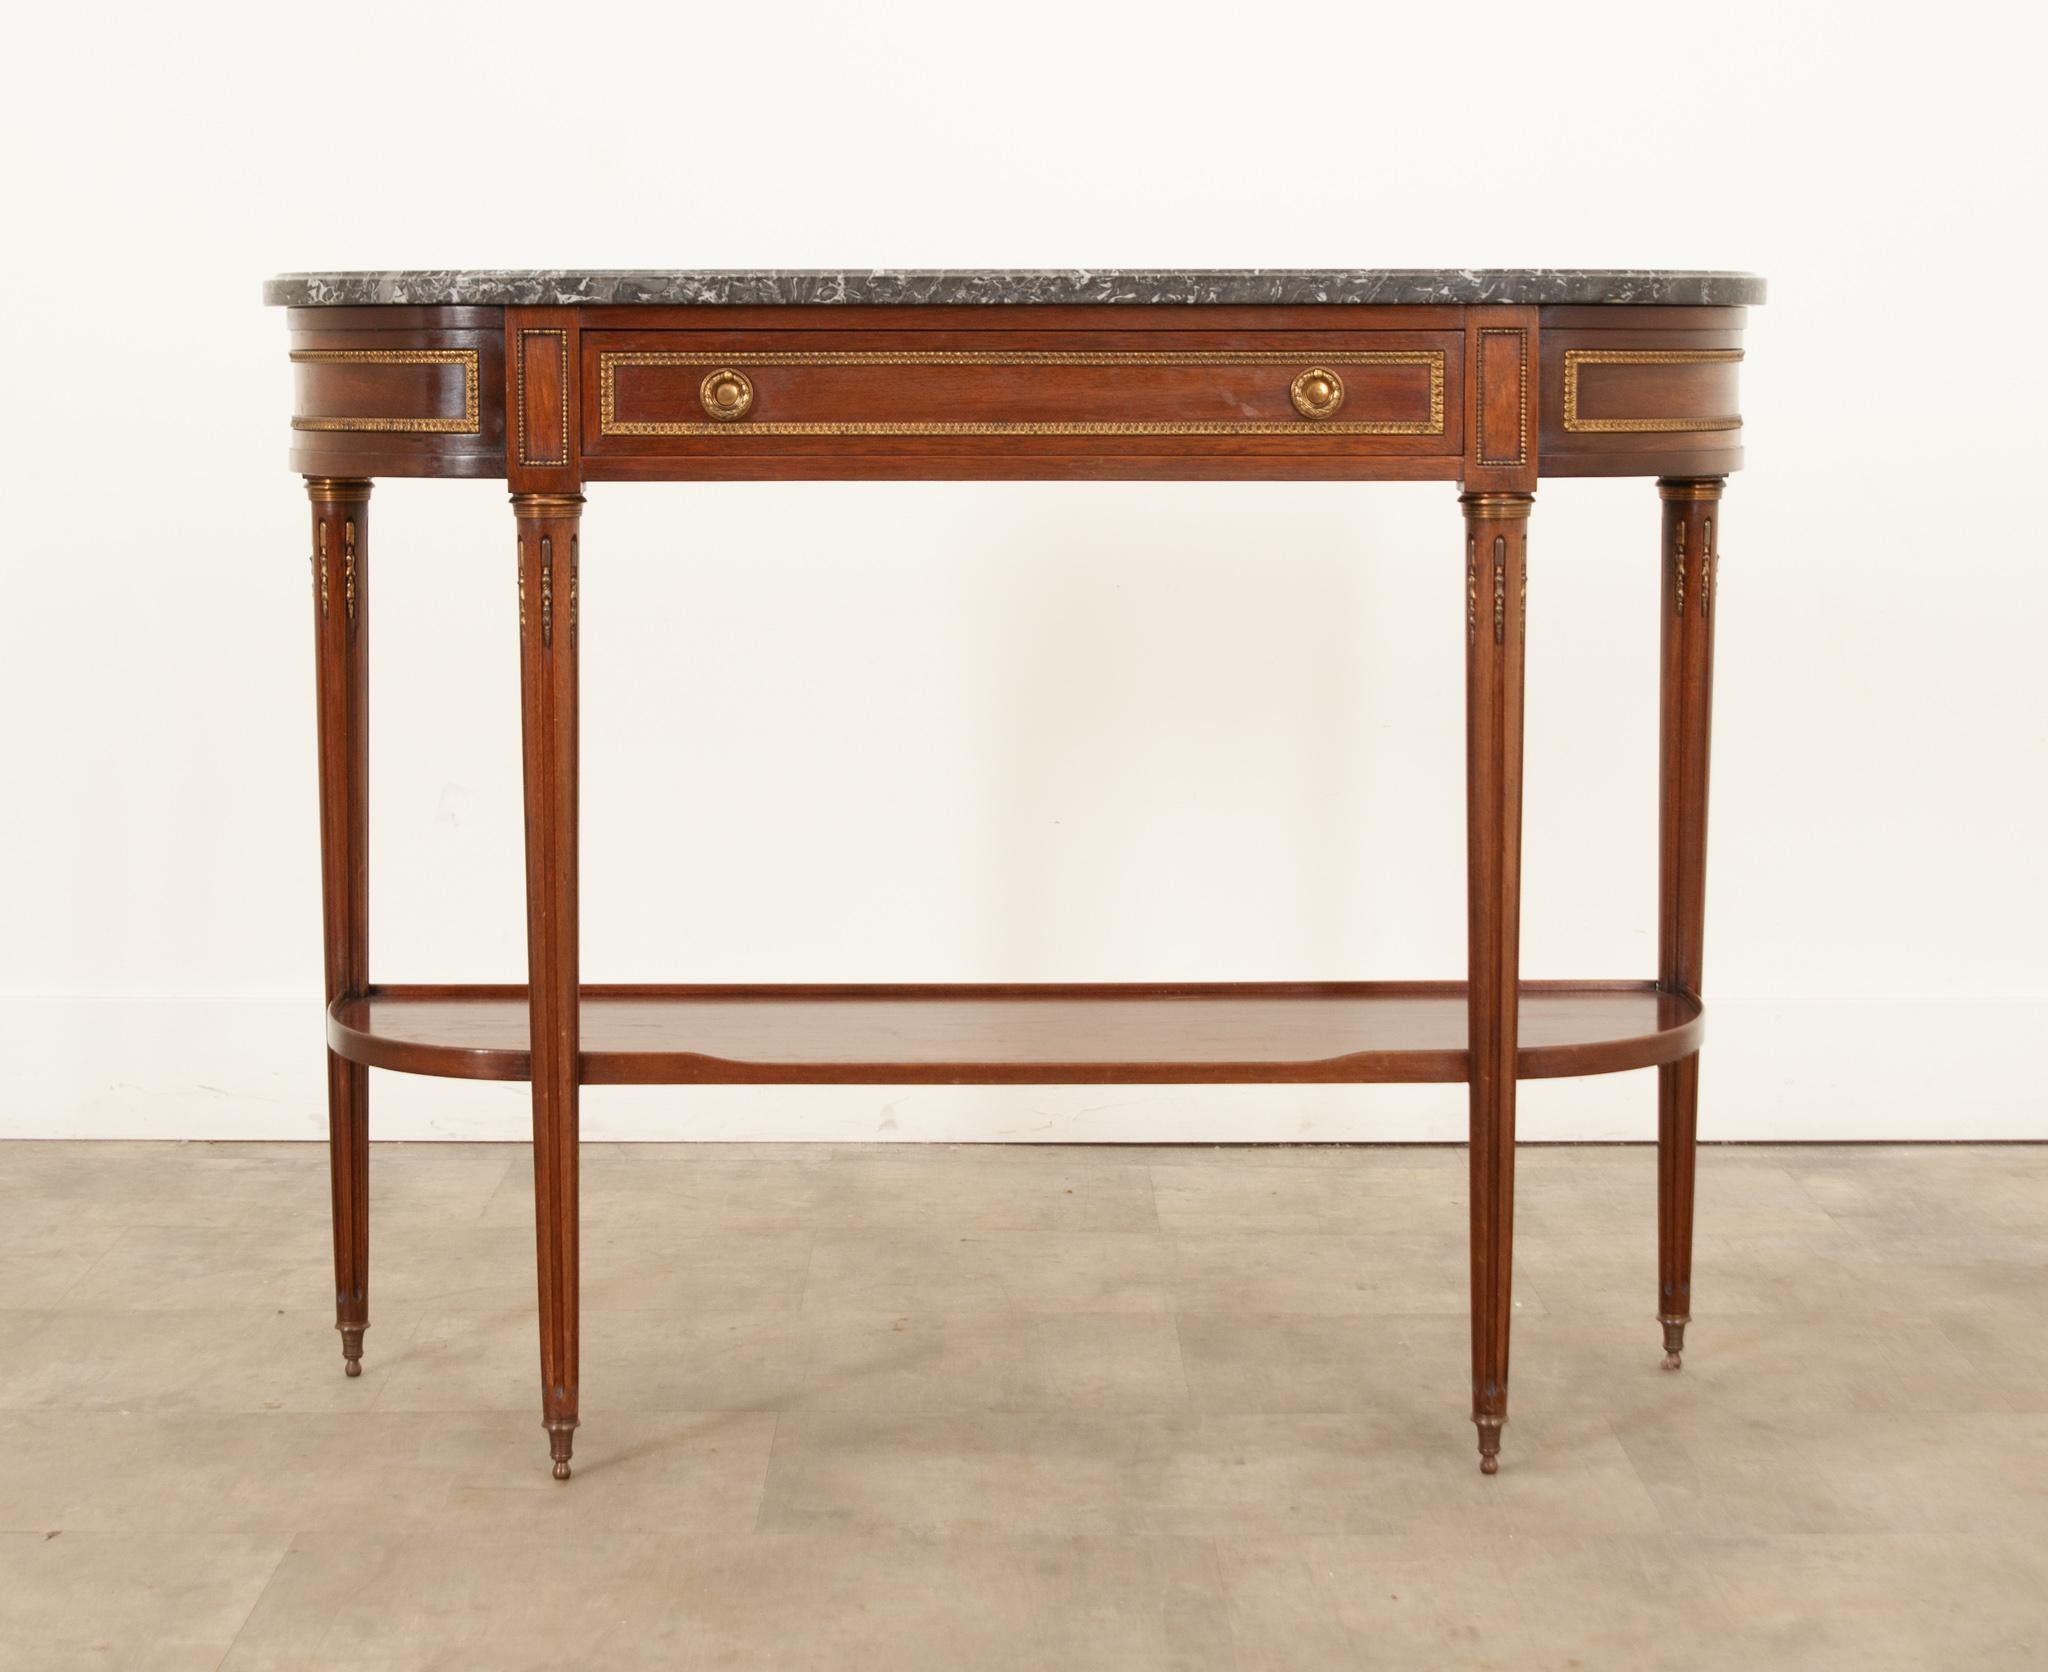 A handsome French Louis XVI style mahogany demilune console table hand-crafetd in France circa 1870. An elegant shaped marble top with a molded edge sits on top displaying wonderful patterns in variations of charcoal and white. The semi-circular top